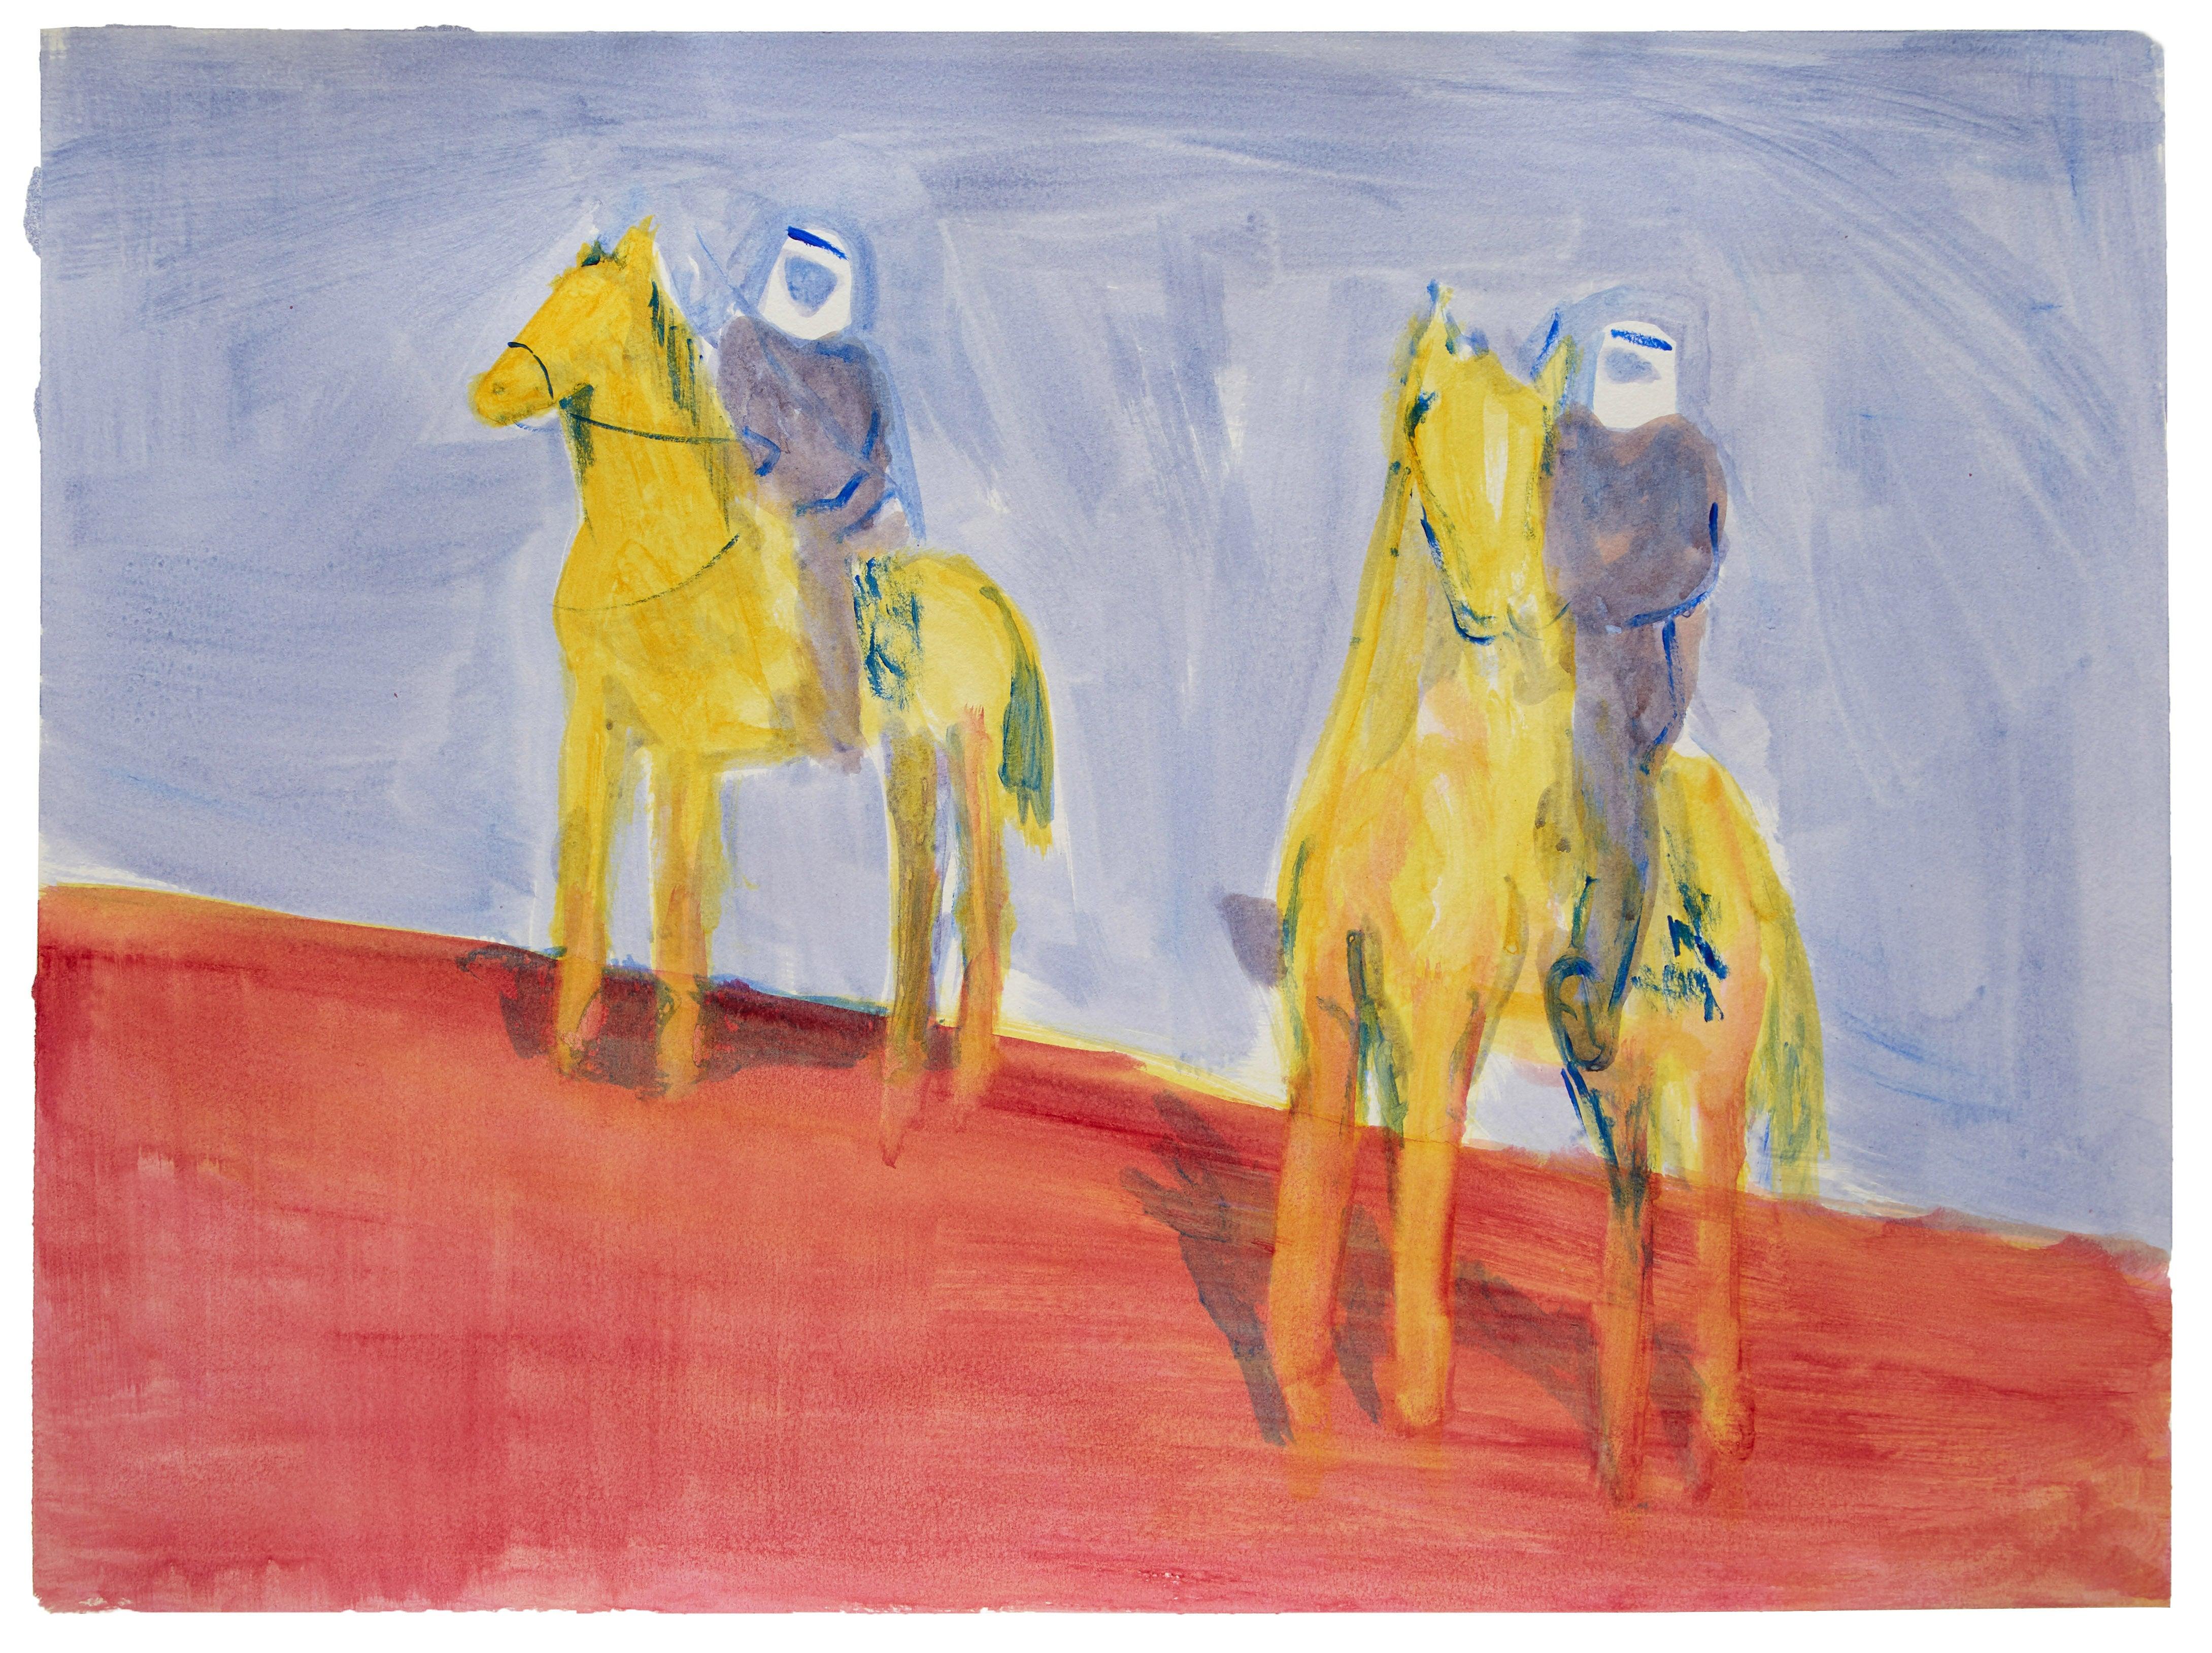 Ibrahim Abusitta Animal Painting - If You Were a Horse 1 - bright colourful contemporary figurative horse painting